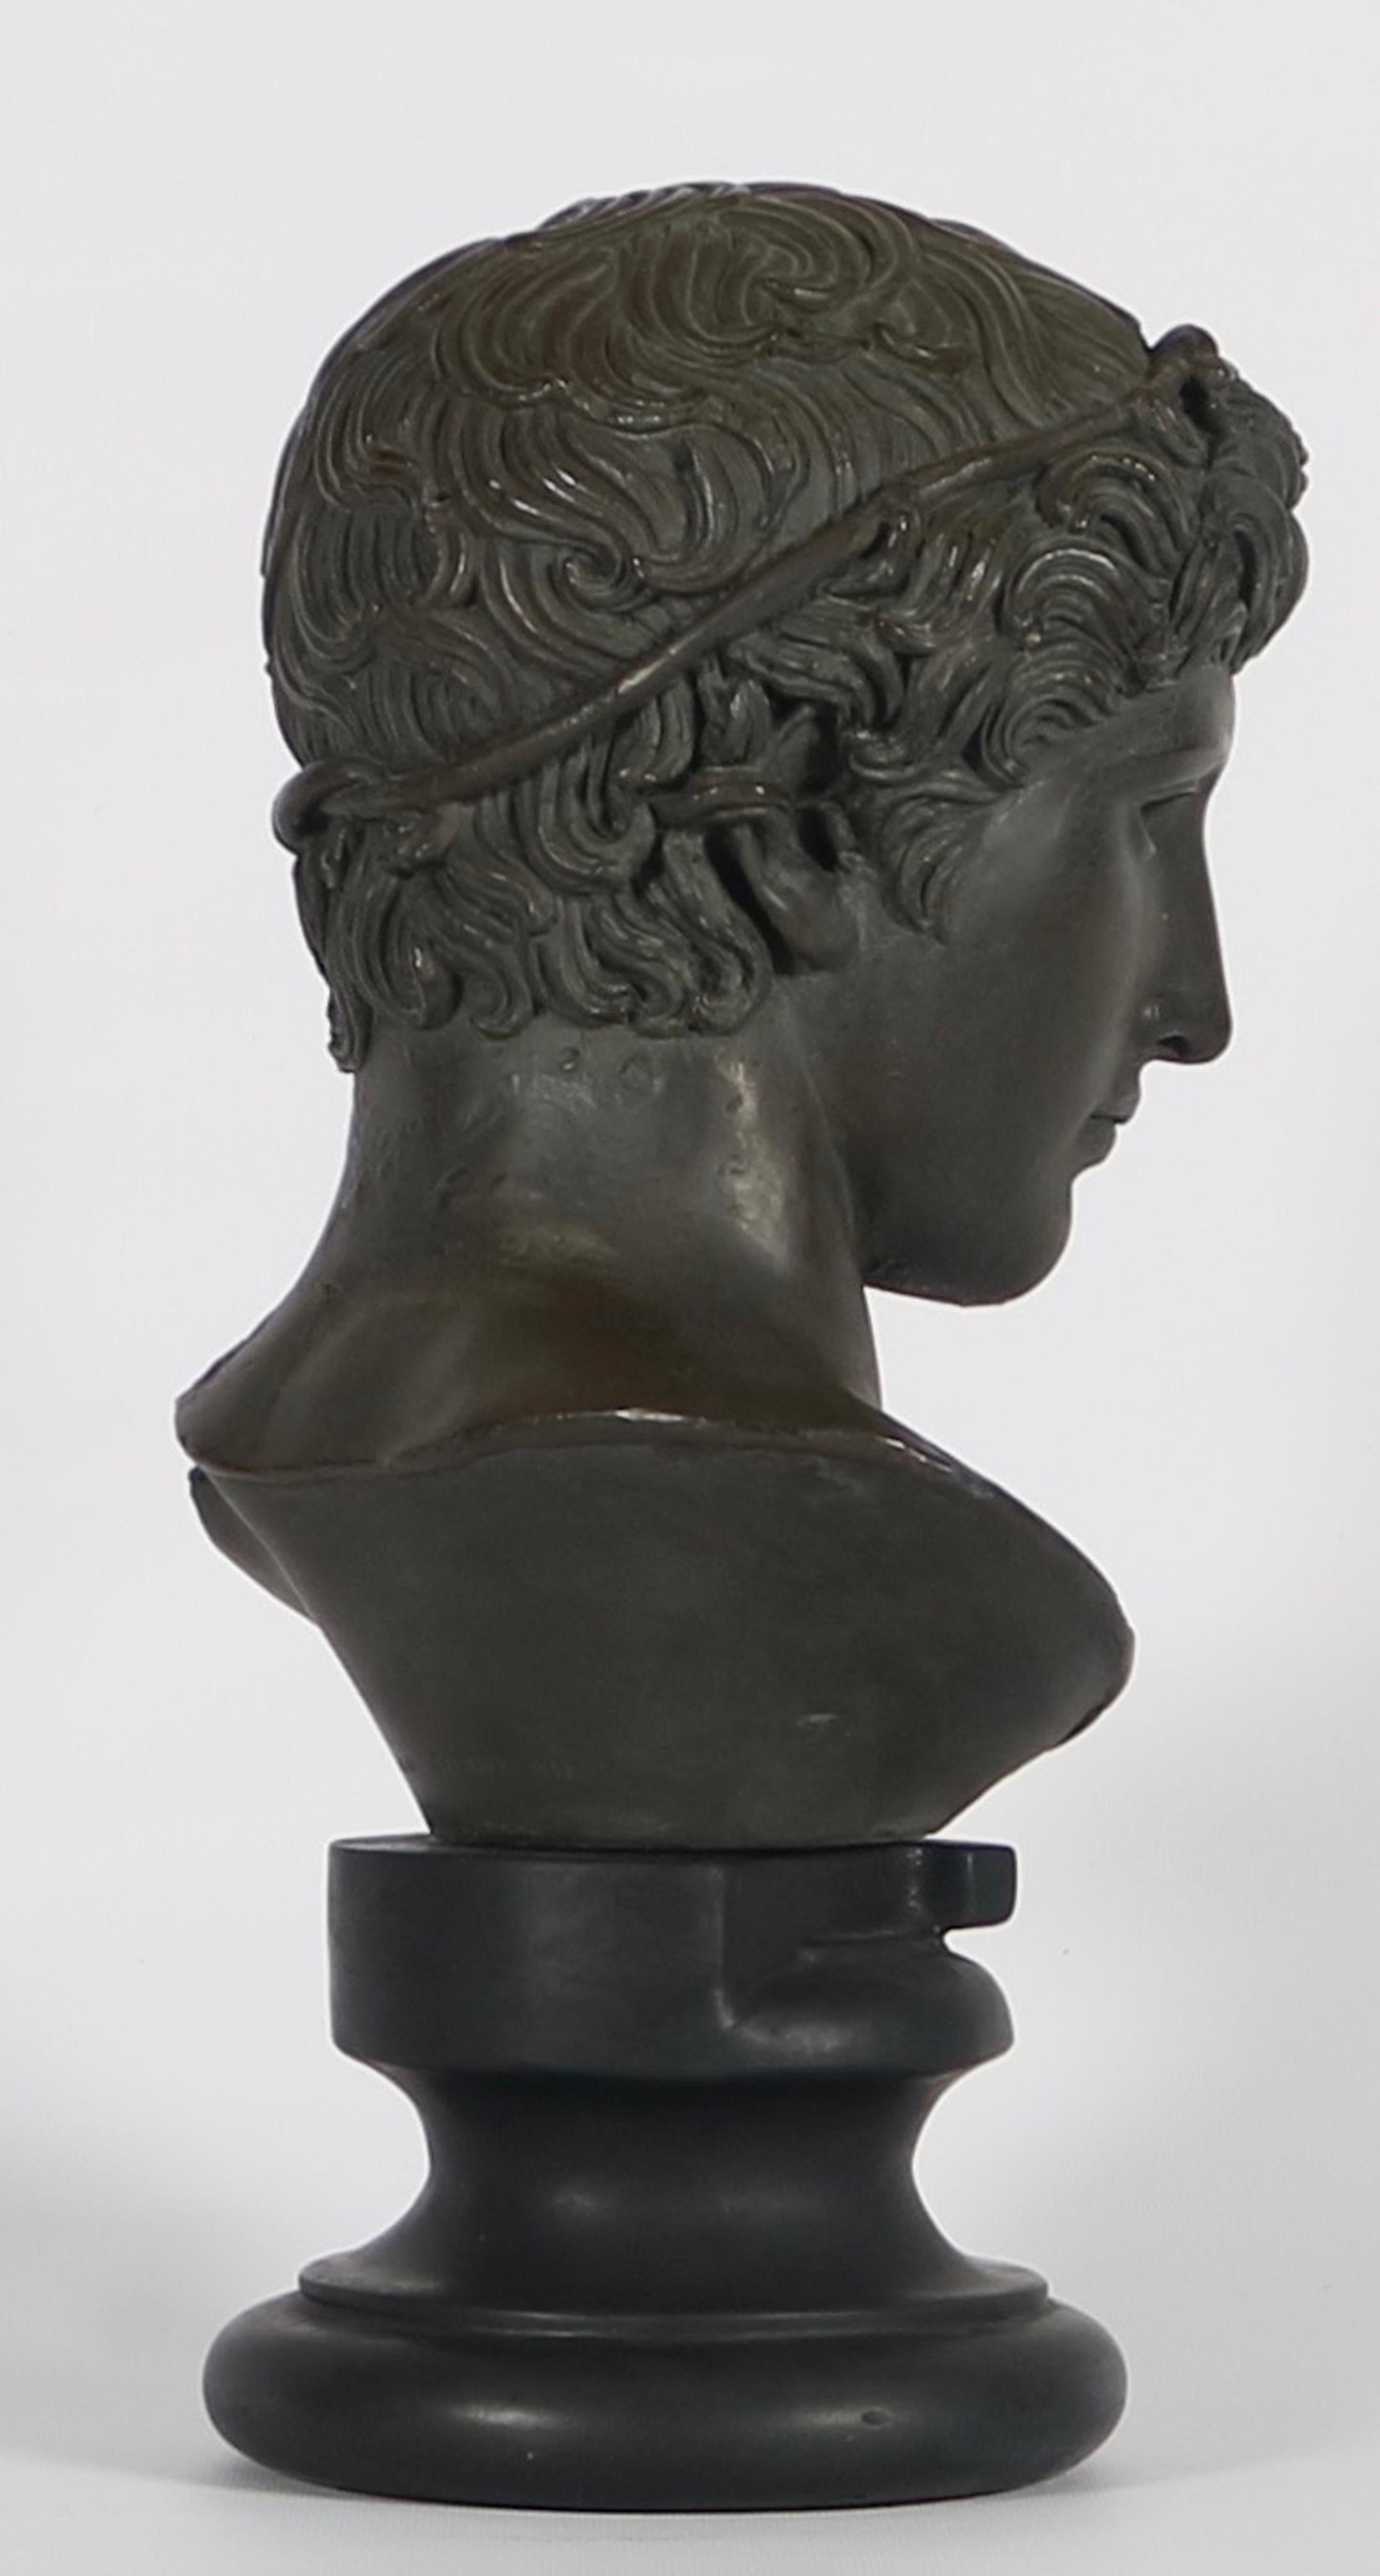 greek busts reproductions